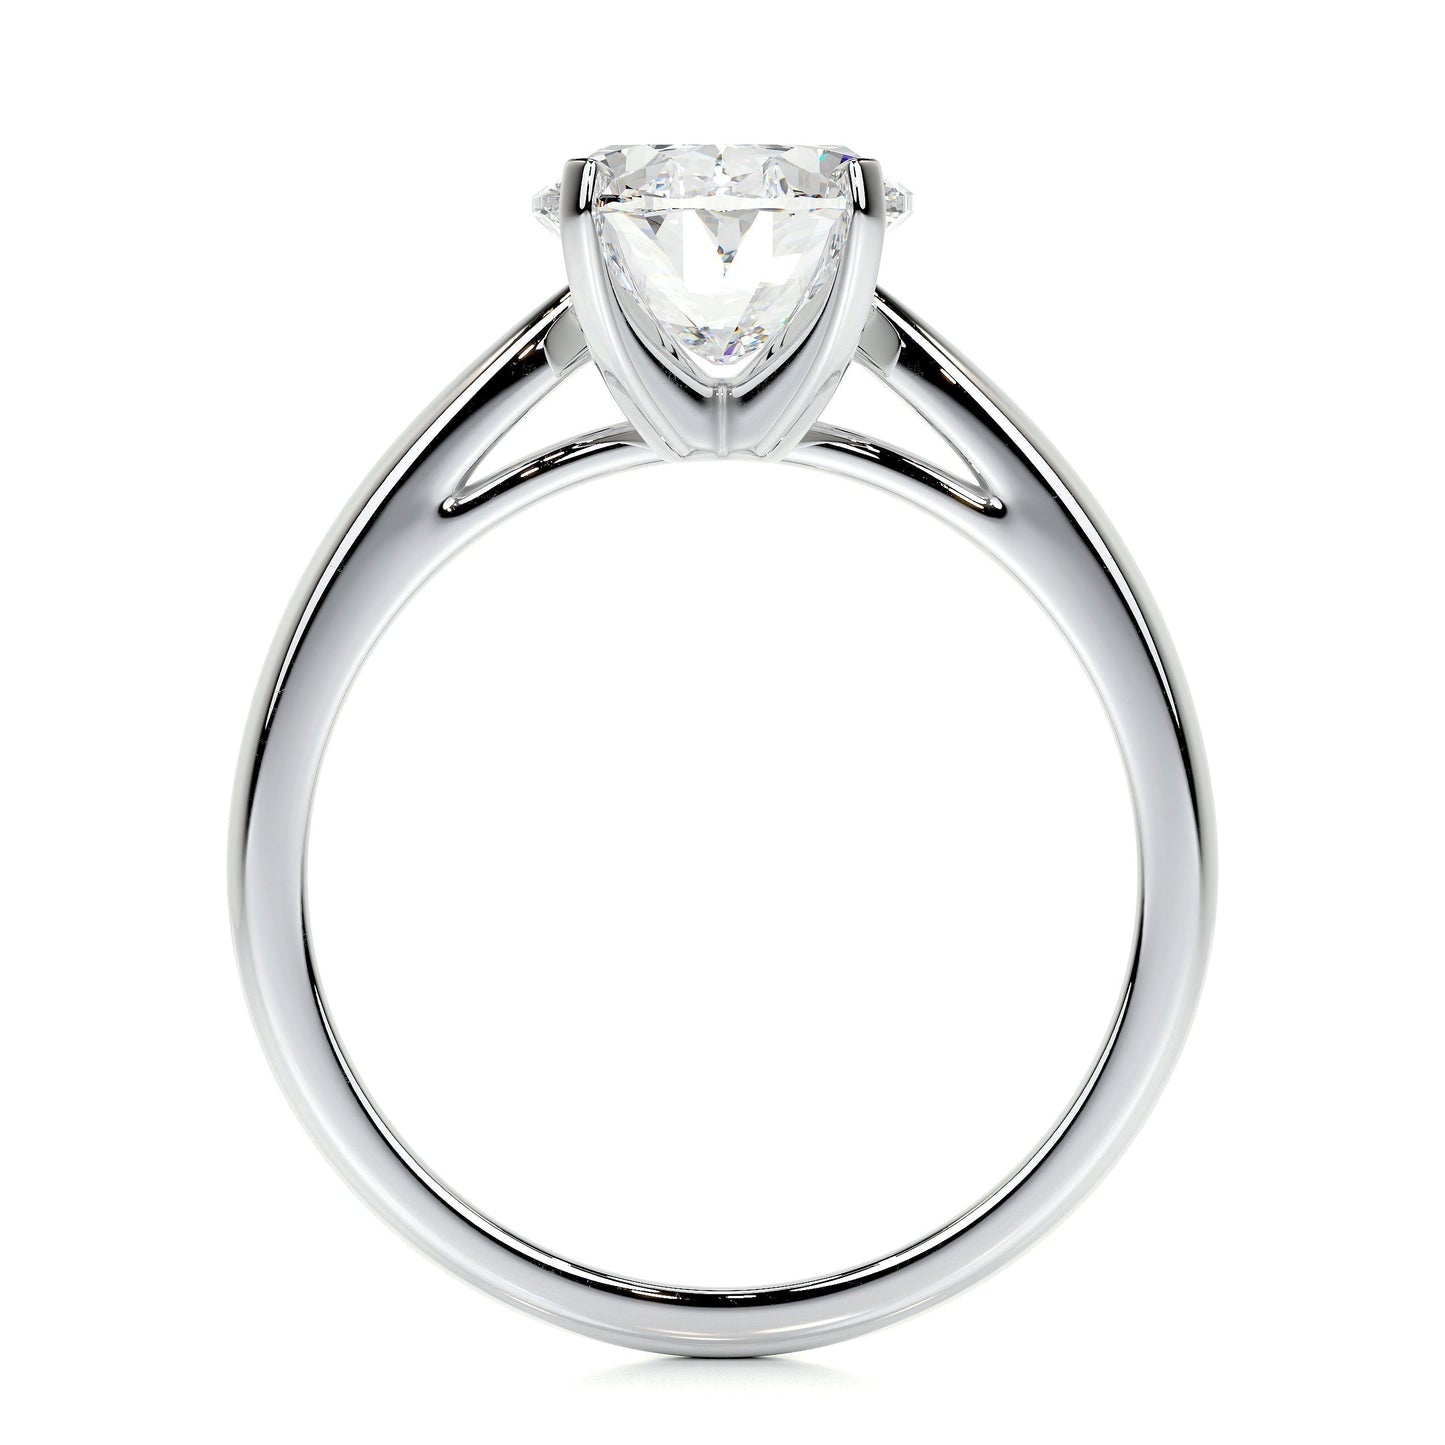 2.0 CT Oval Solitaire CVD G/VS2 Diamond Engagement Ring 5